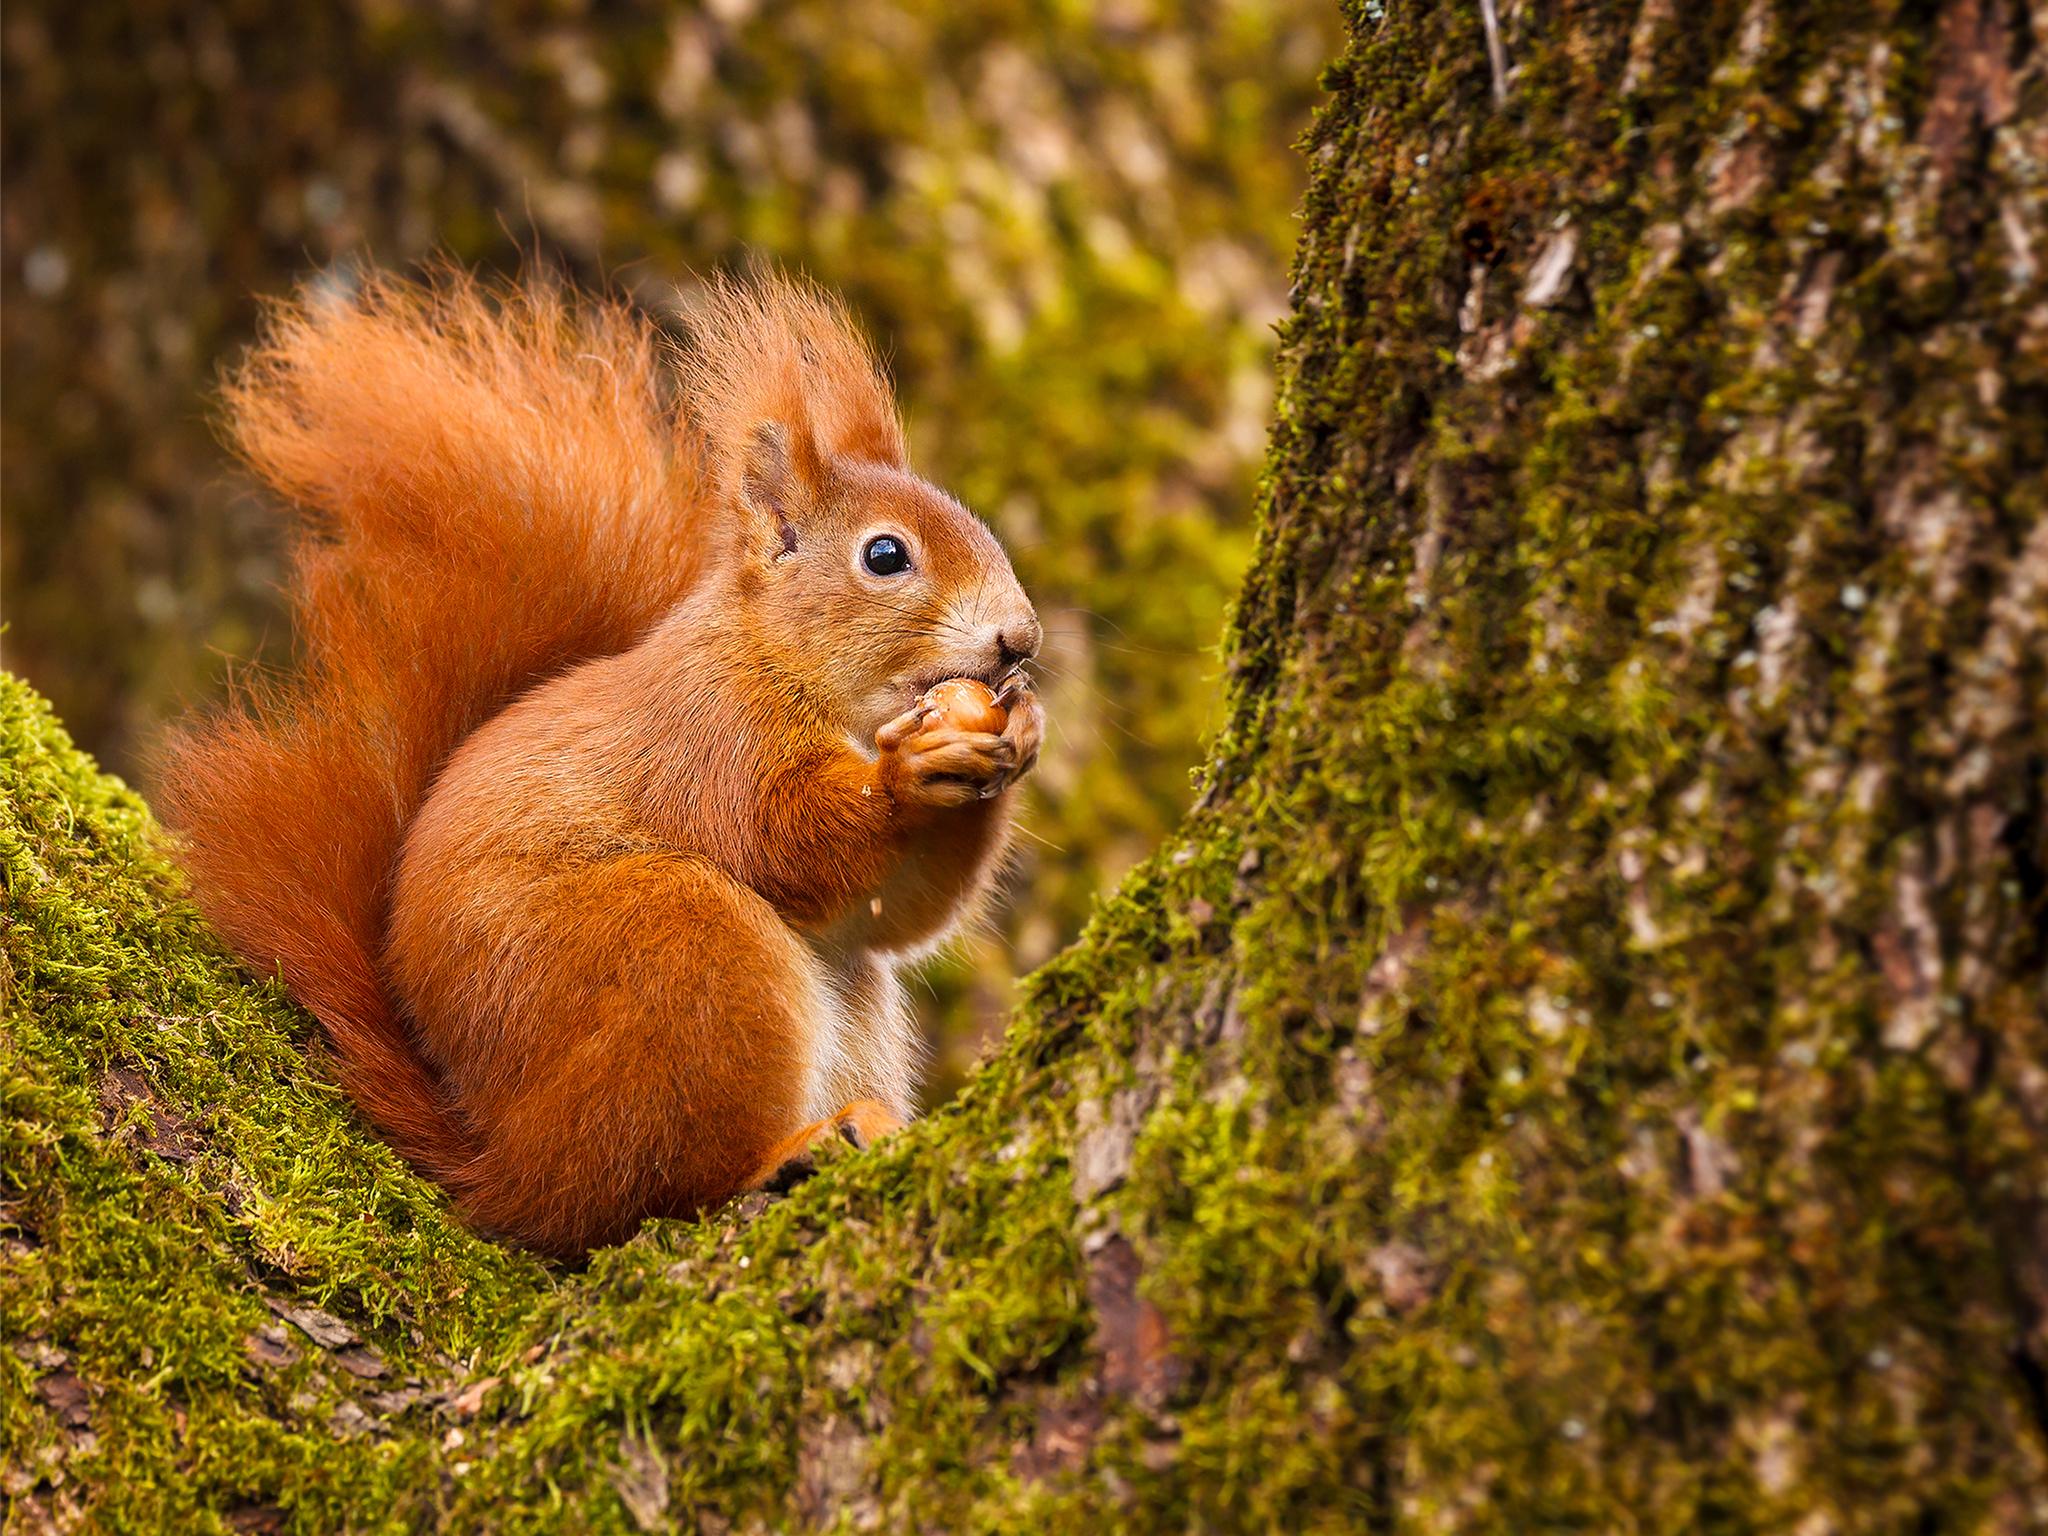 Protected woodland species like the red squirrel are put at risk by the loophole in timber harvesting laws